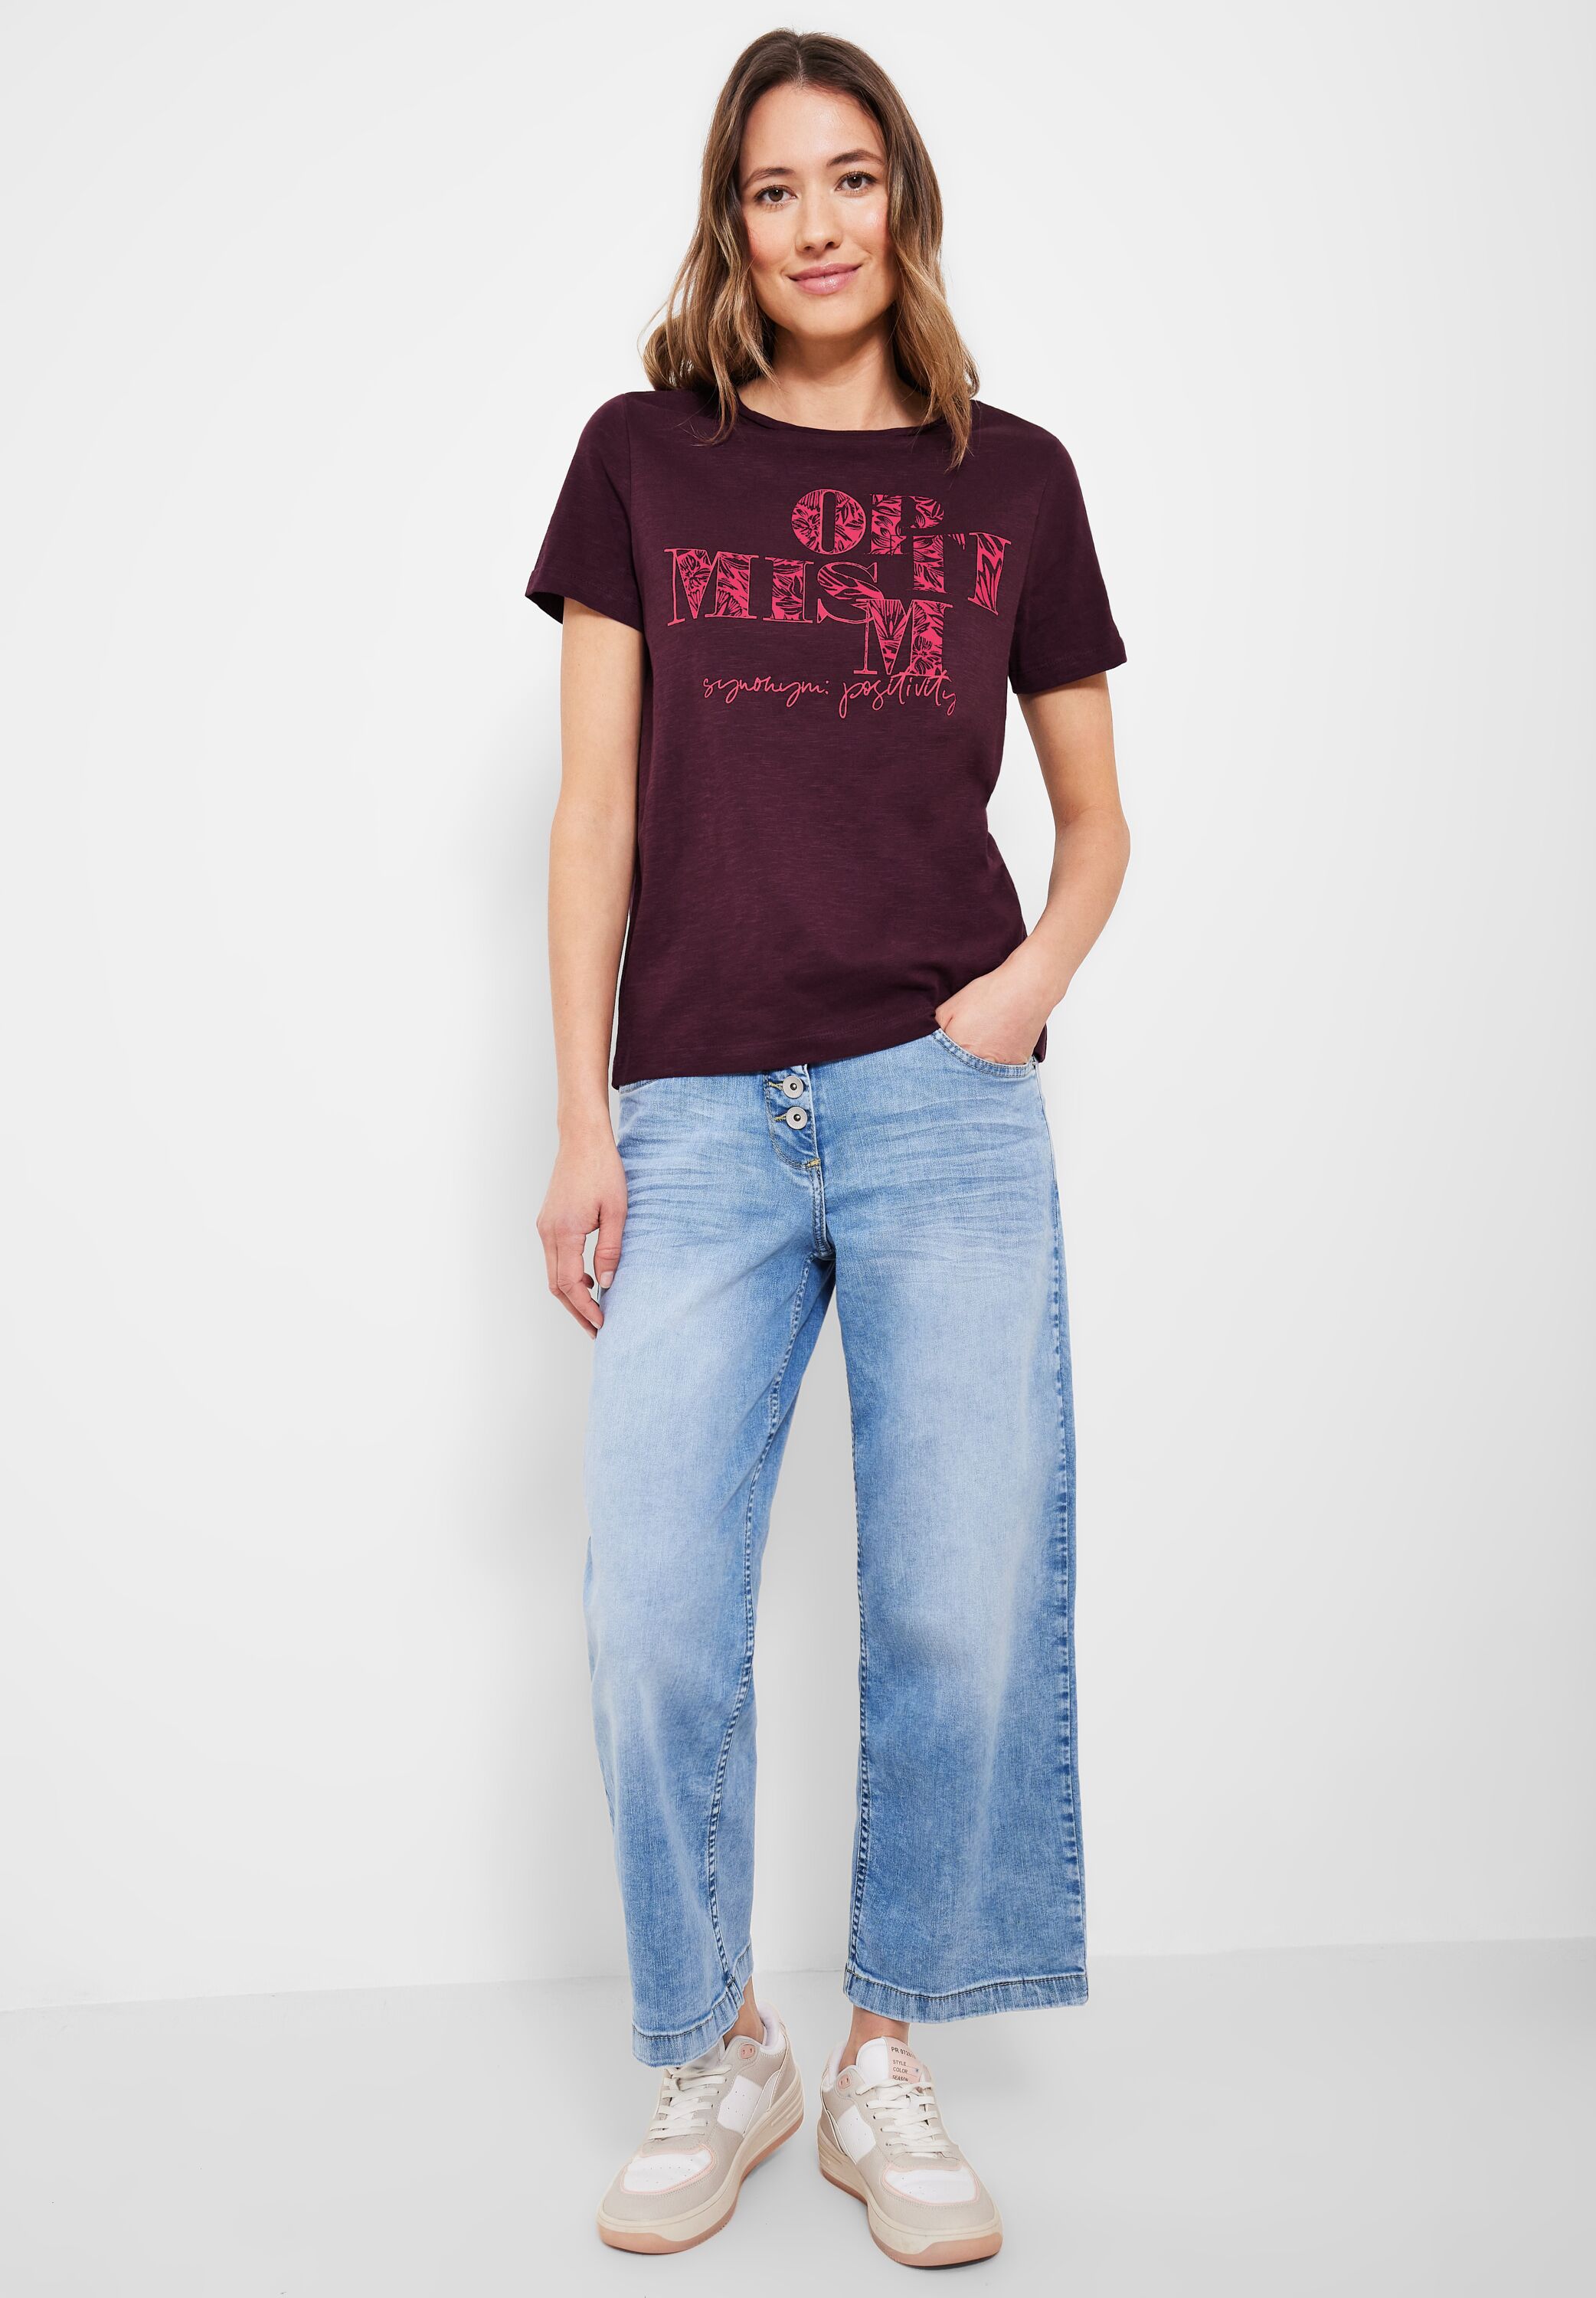 reduziert in CONCEPT - B319637-34918 Mode Wineberry CECIL SALE im Red T-Shirt